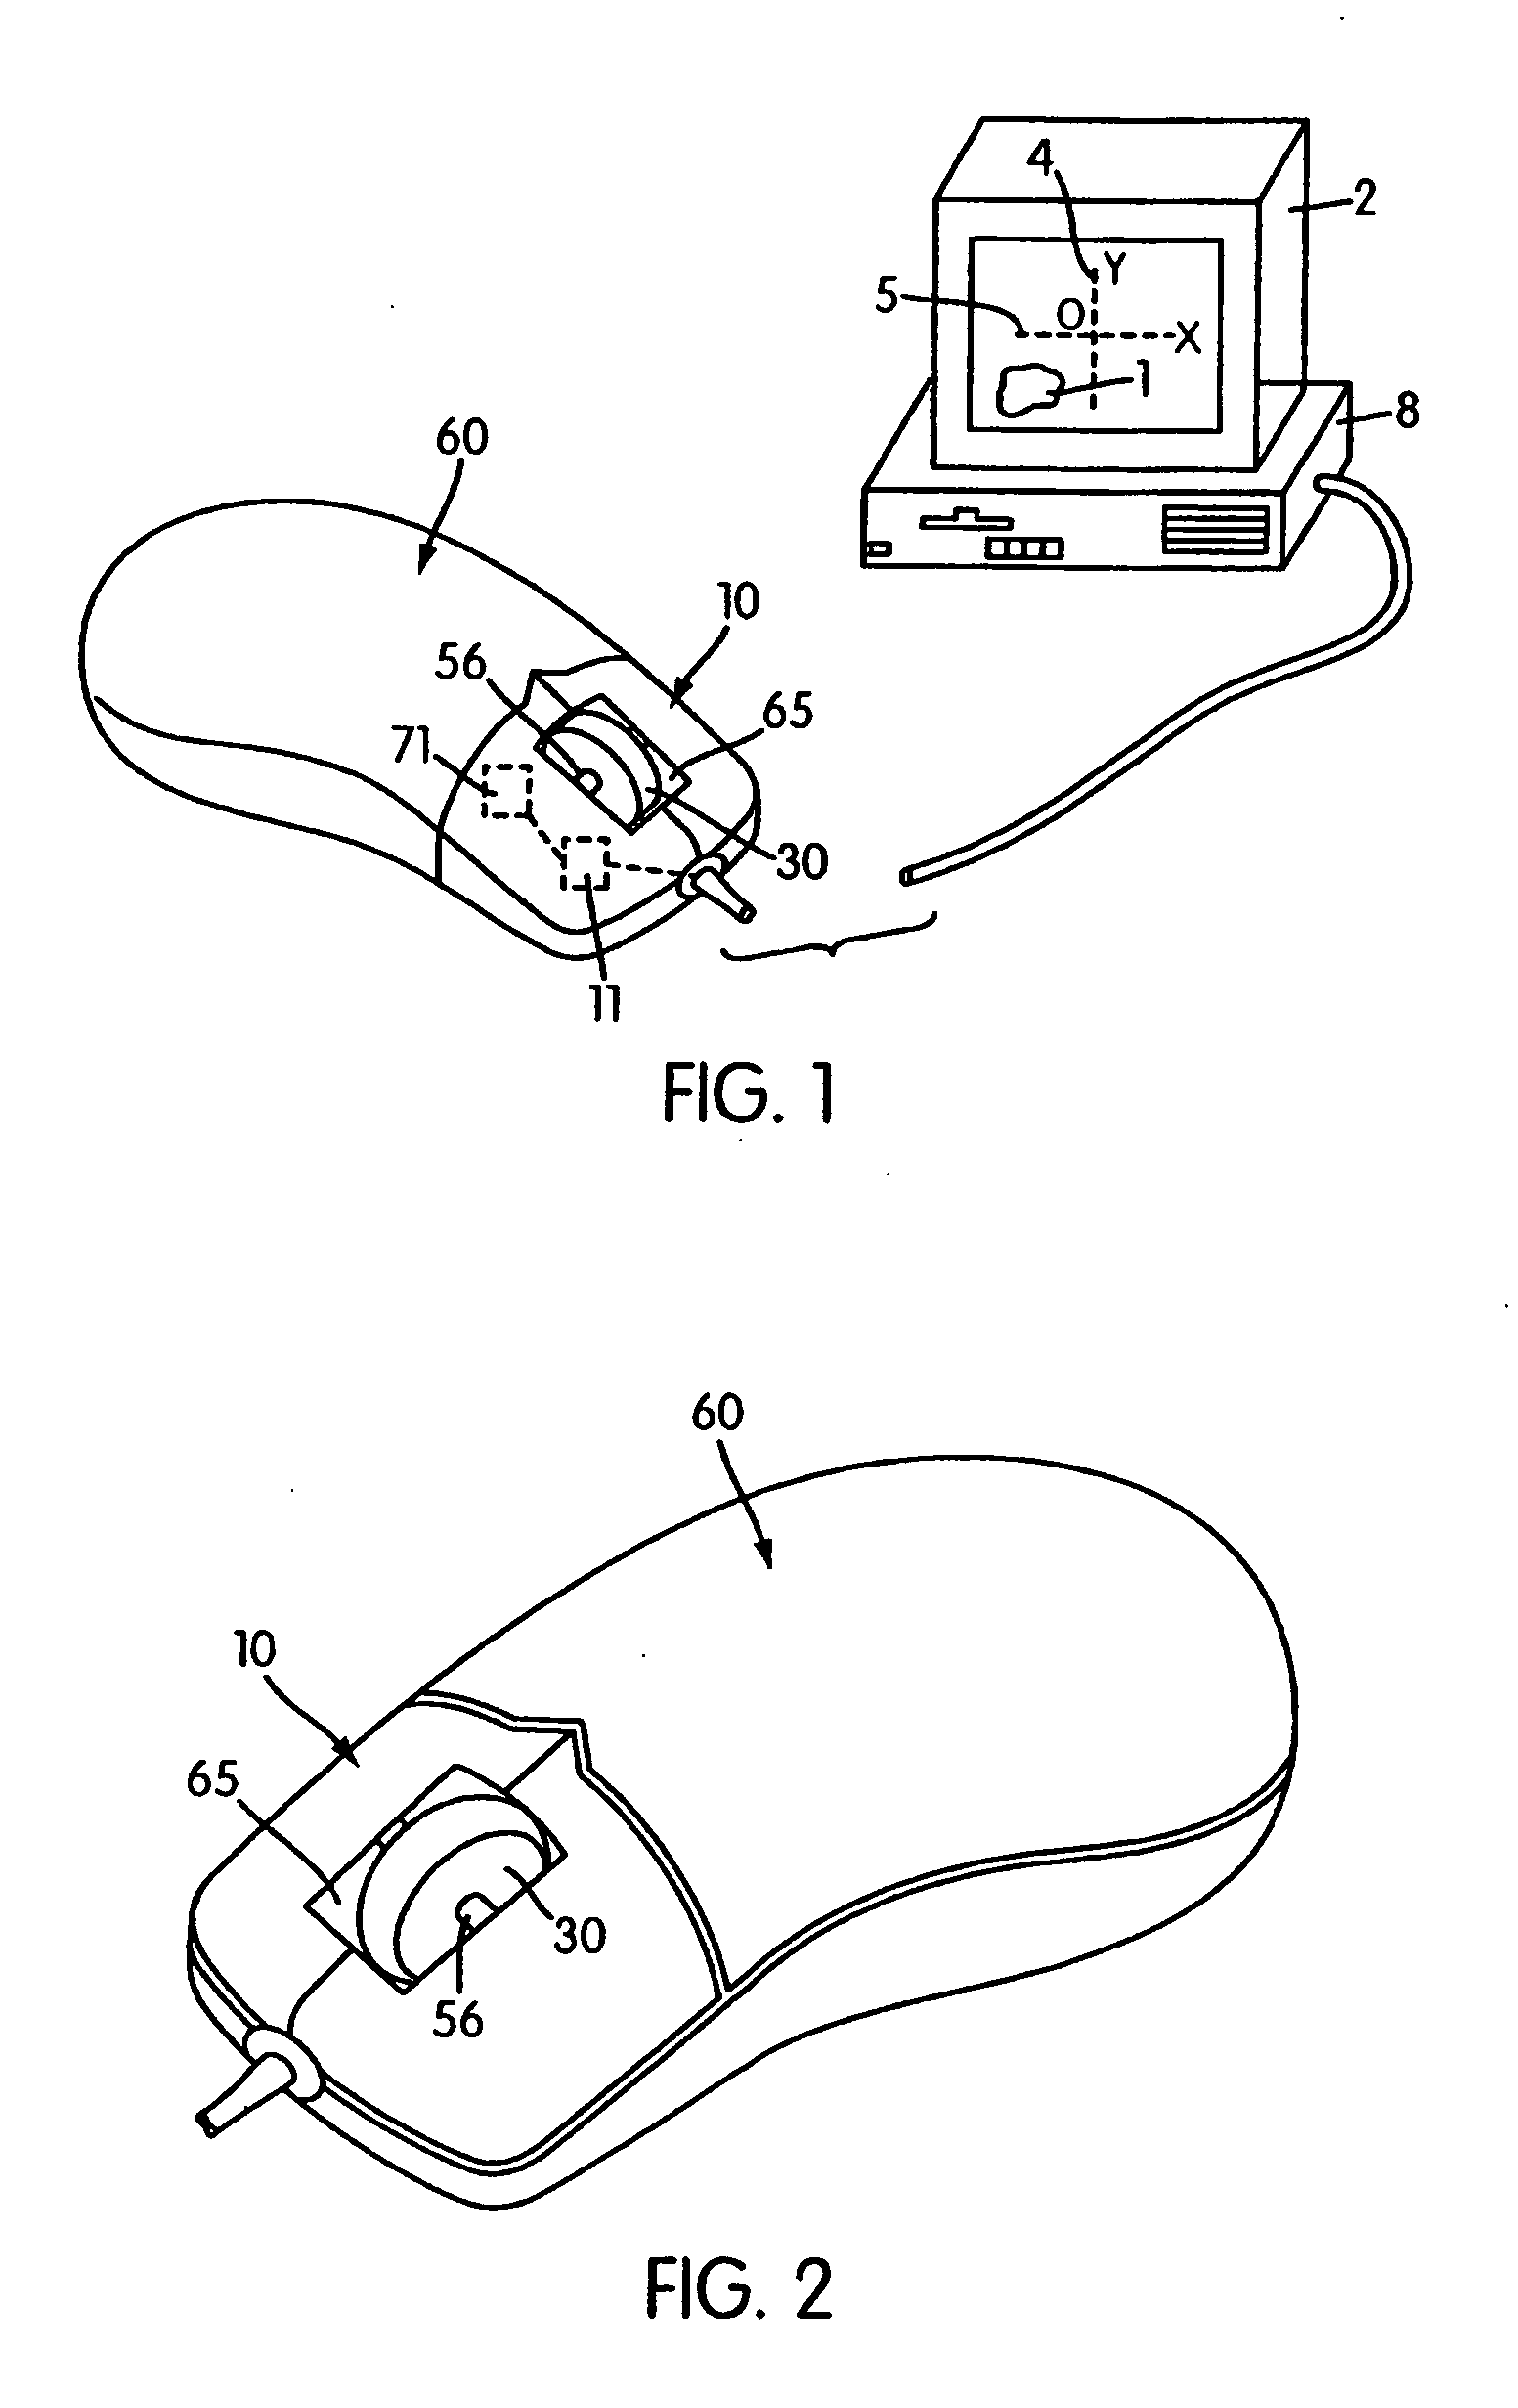 Input device including a wheel assembly for scrolling an image in multiple directions